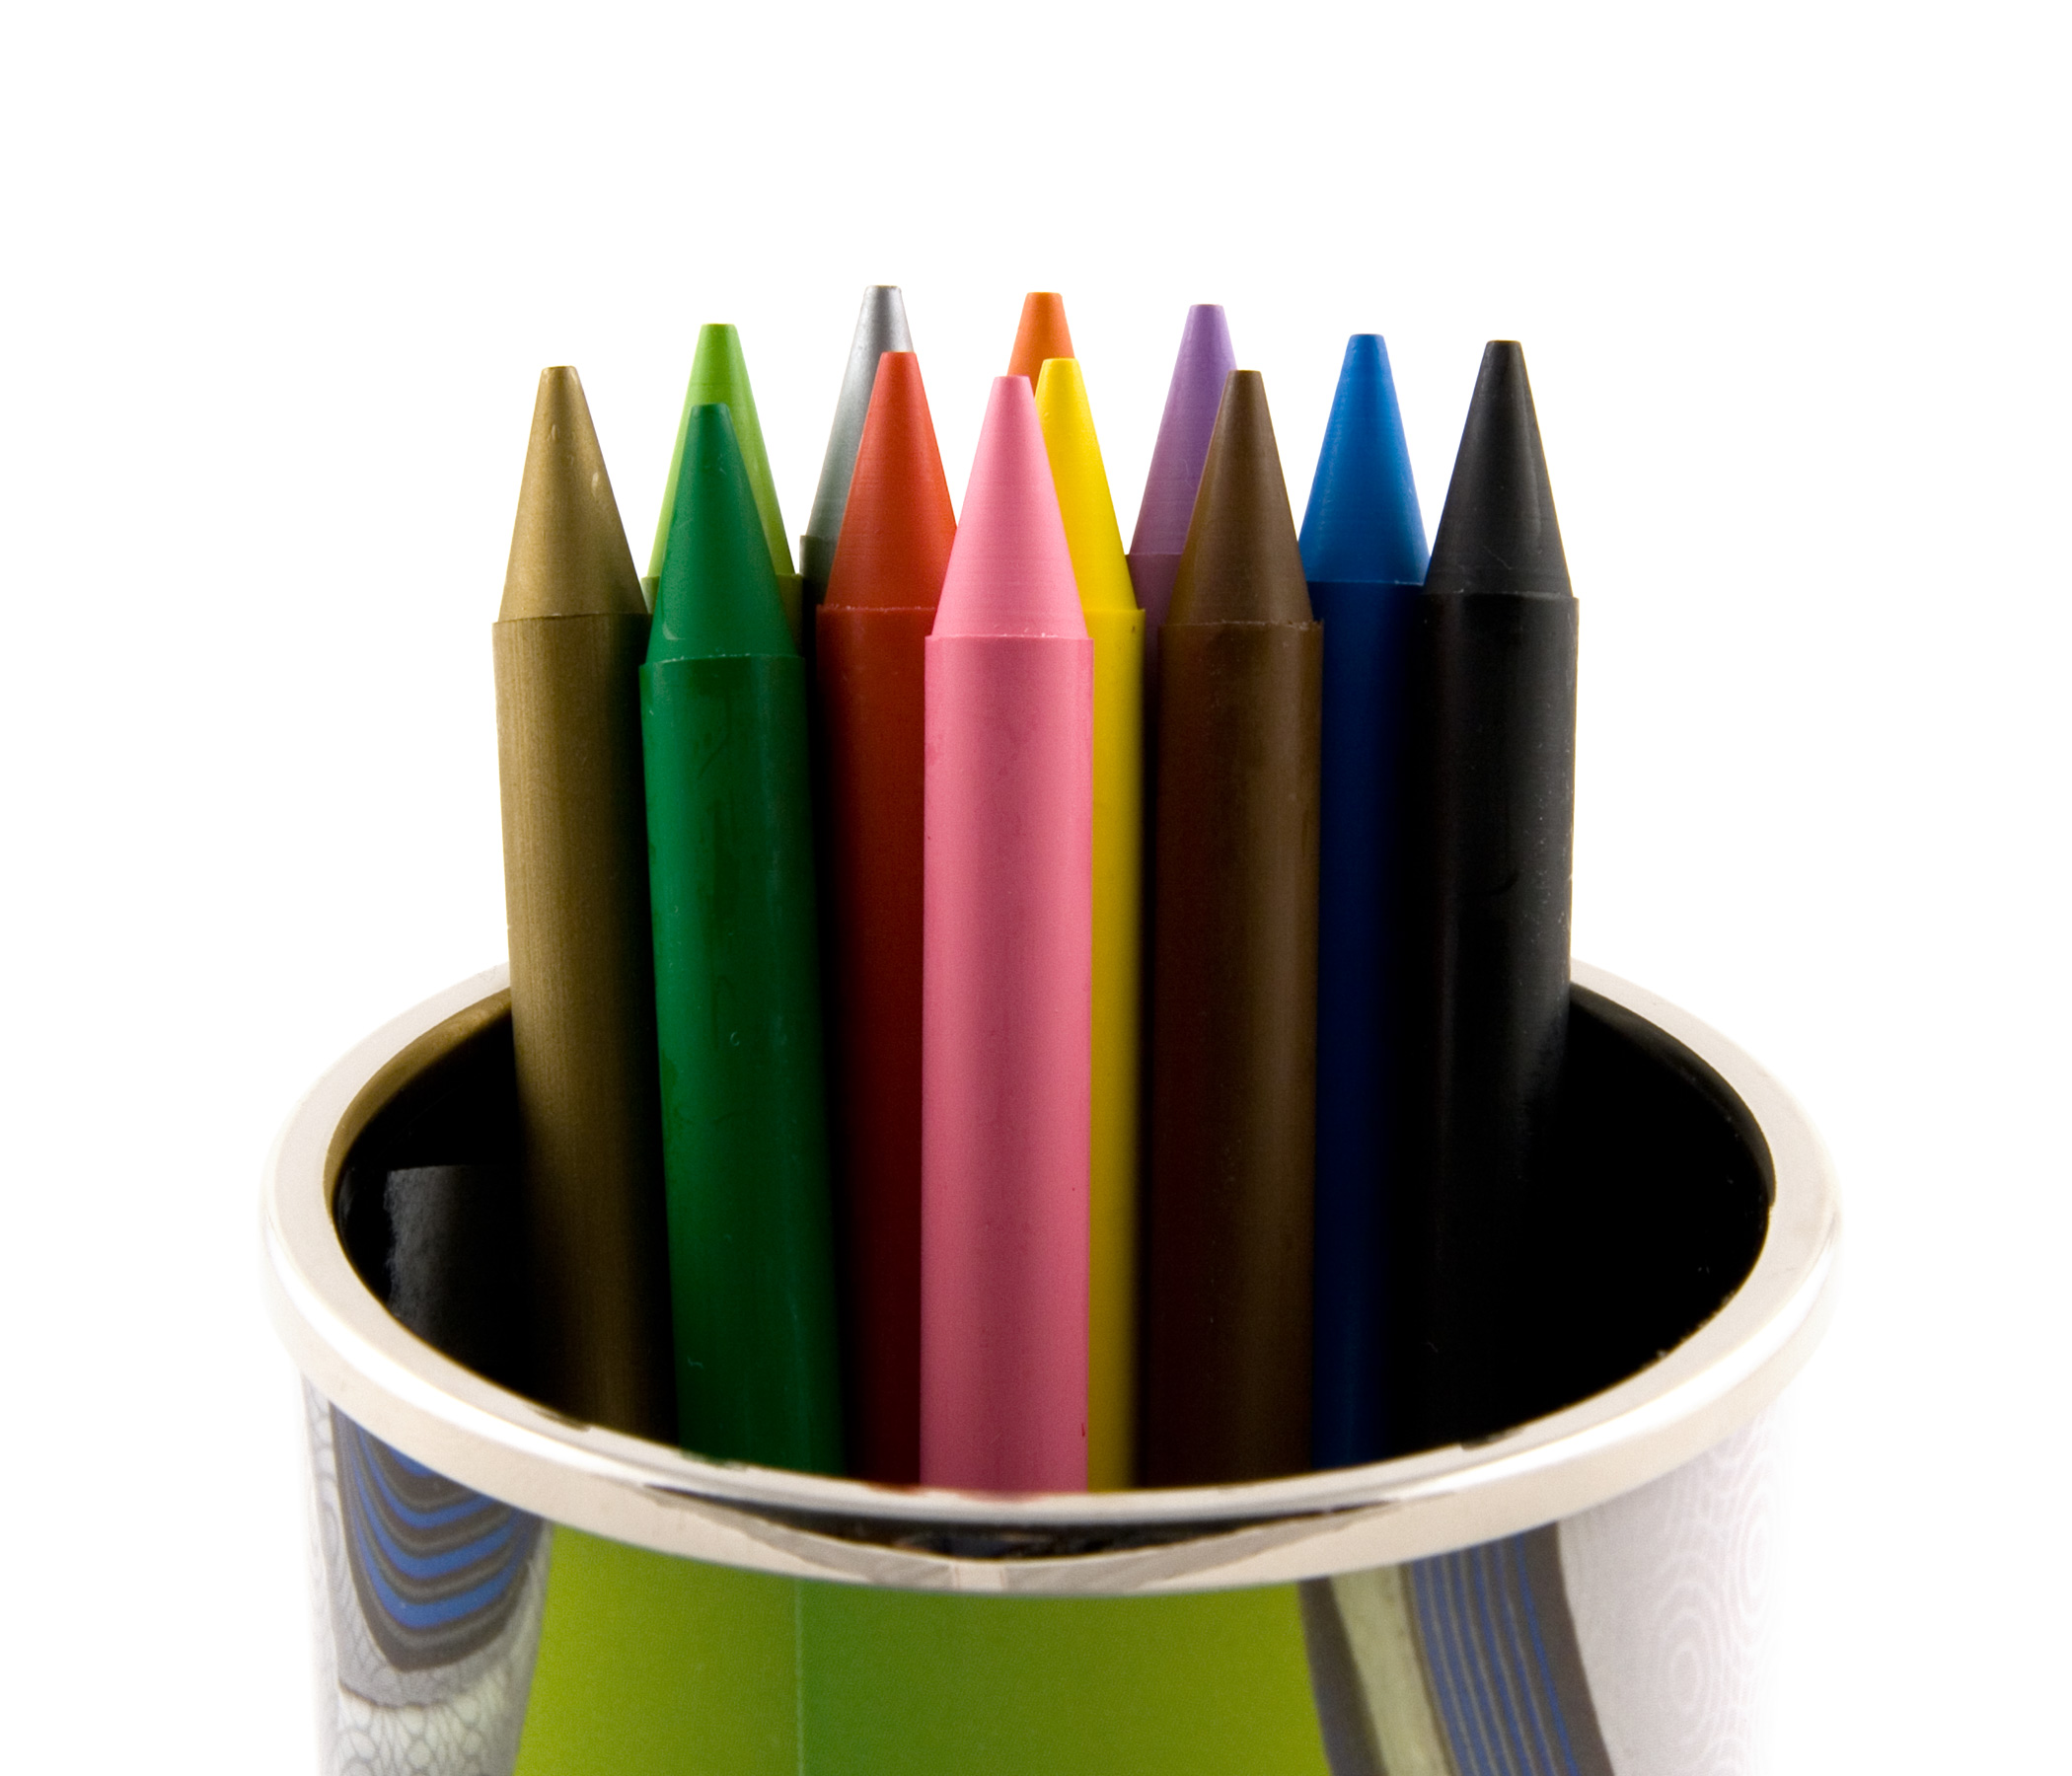 Colored crayons in a bin